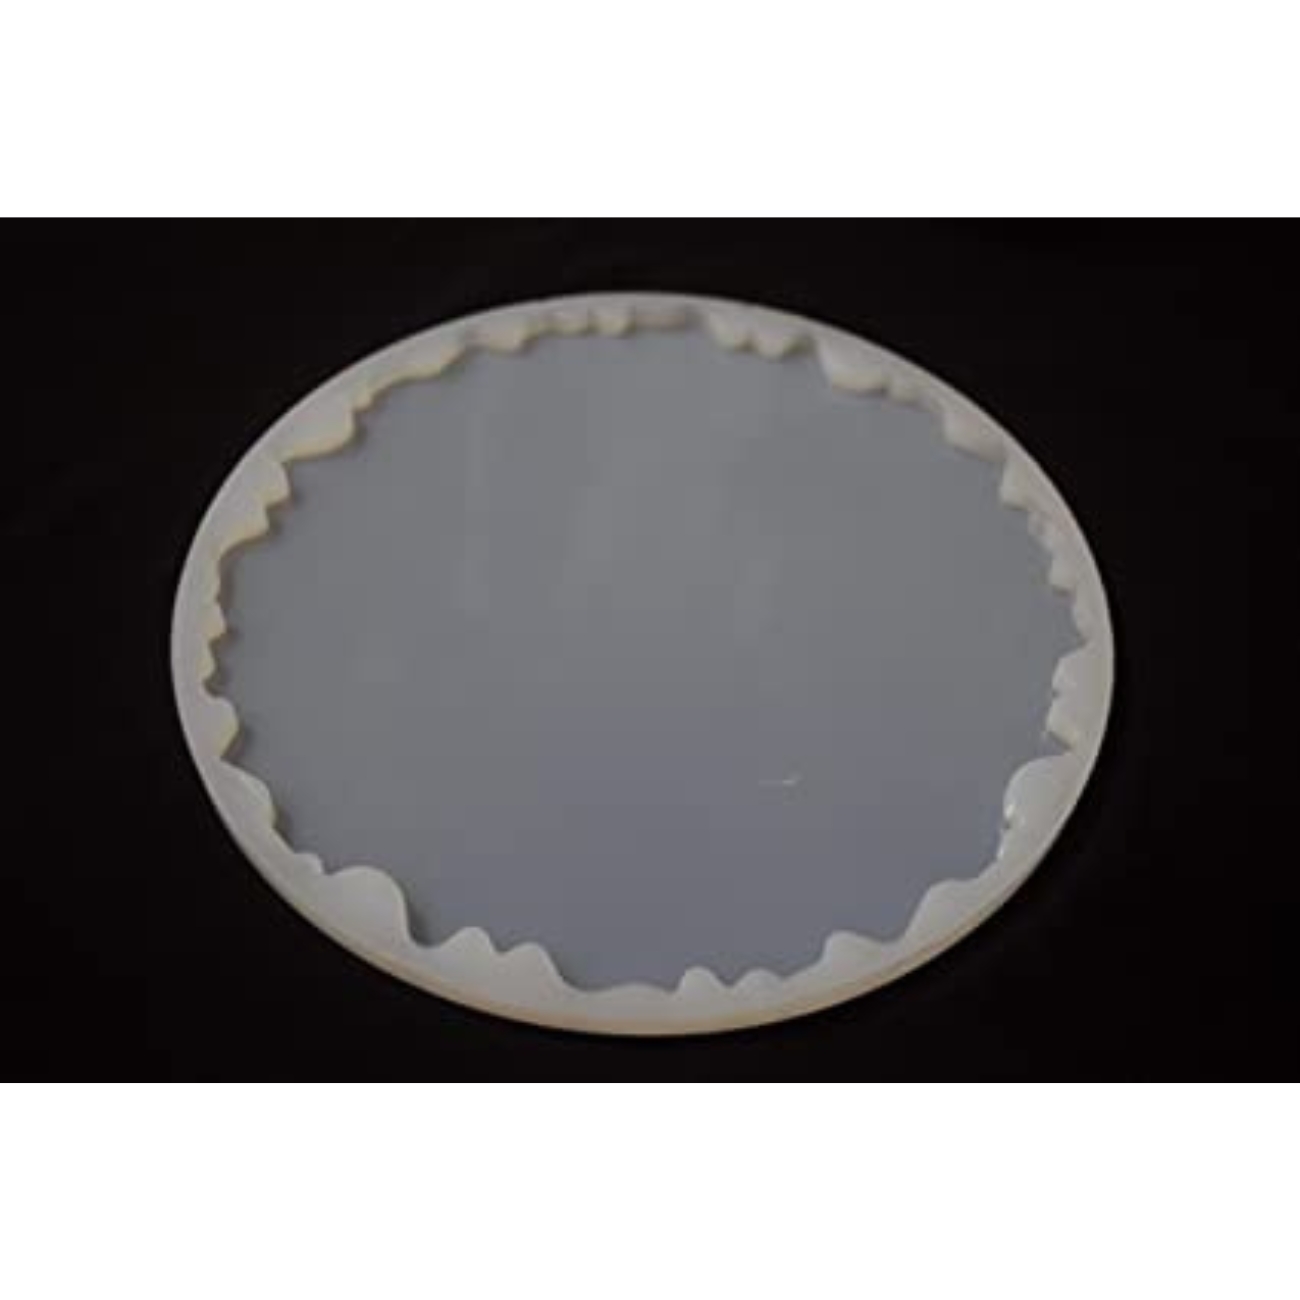 sodee-agate-tray-resin-mould-12-quot